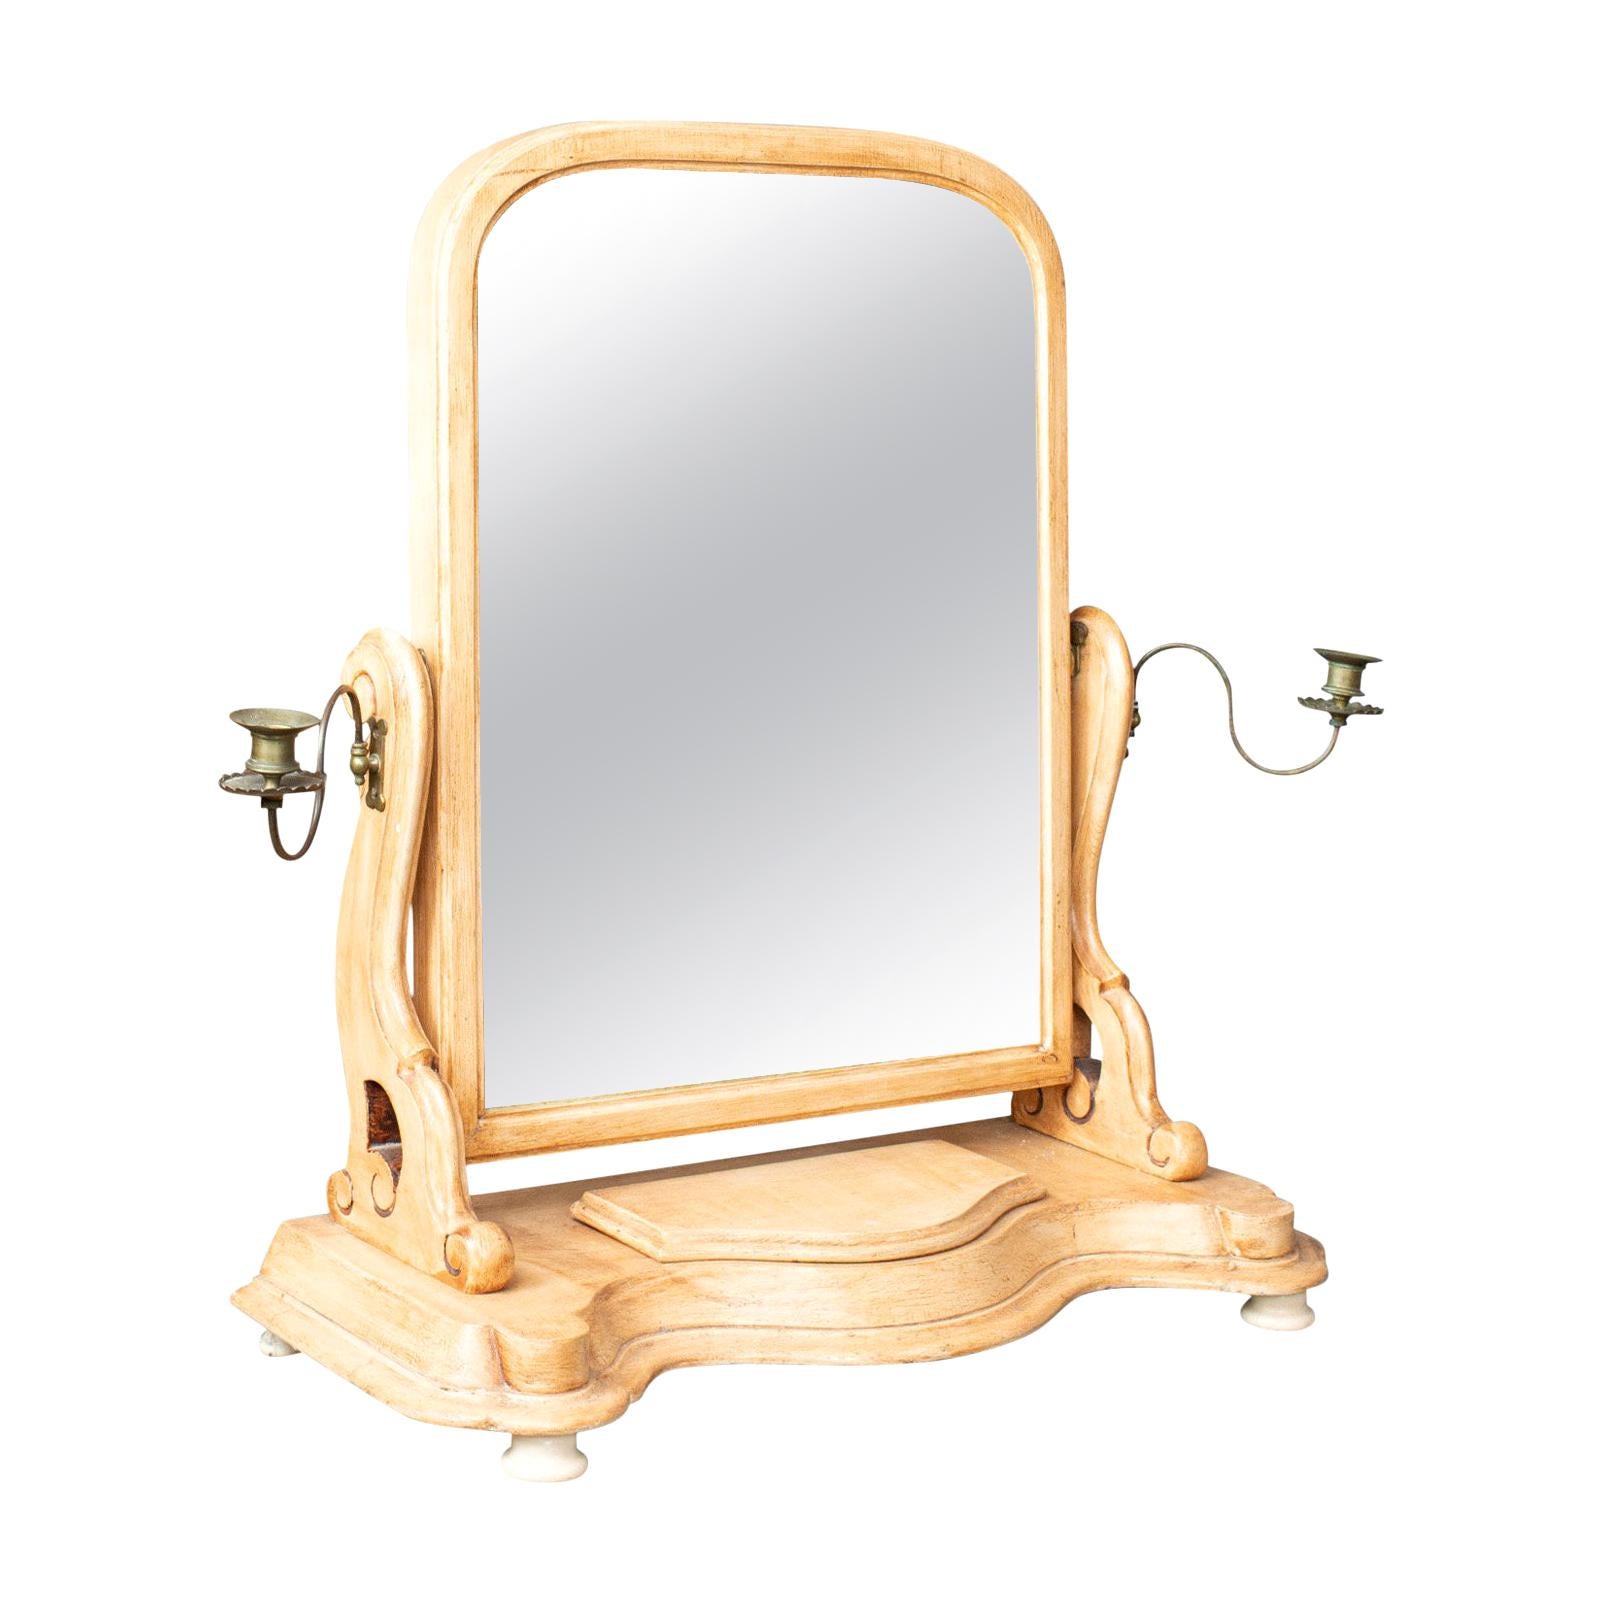 Antique Dressing Table Mirror, English Victorian, Vanity, Toilet, Painted For Sale